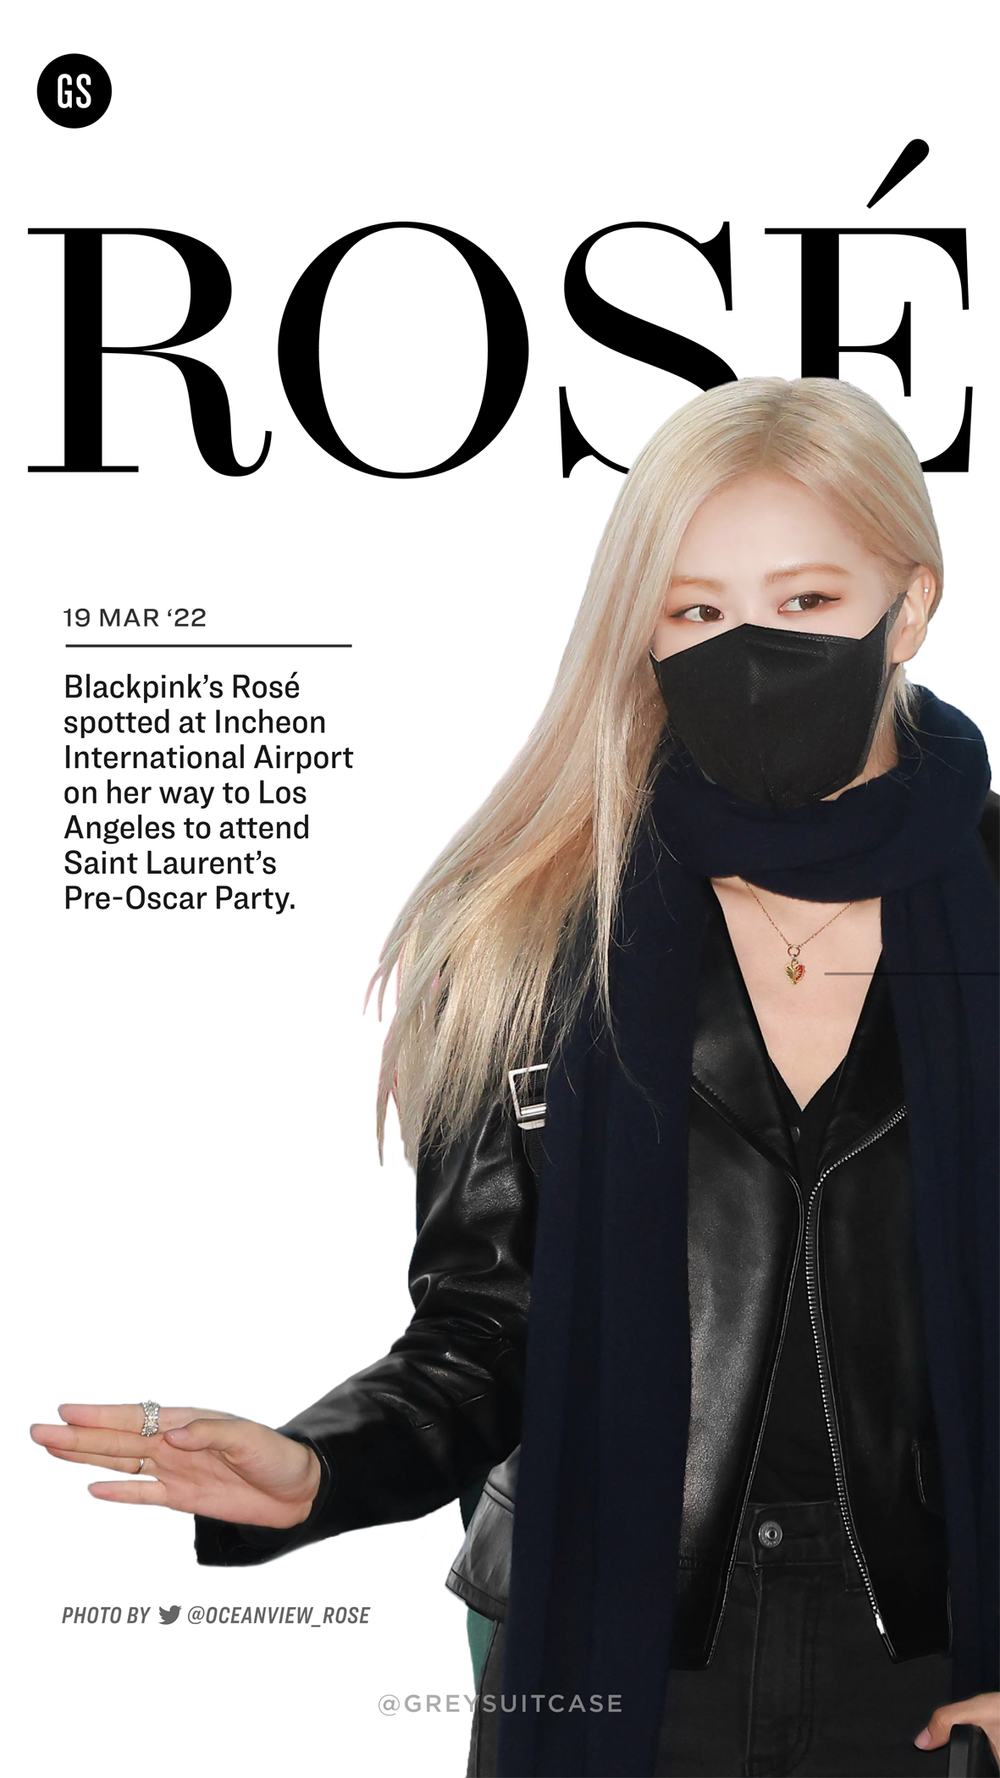 Blackpink Rosé at Incheon Airport & L.A Sightings — Greysuitcase